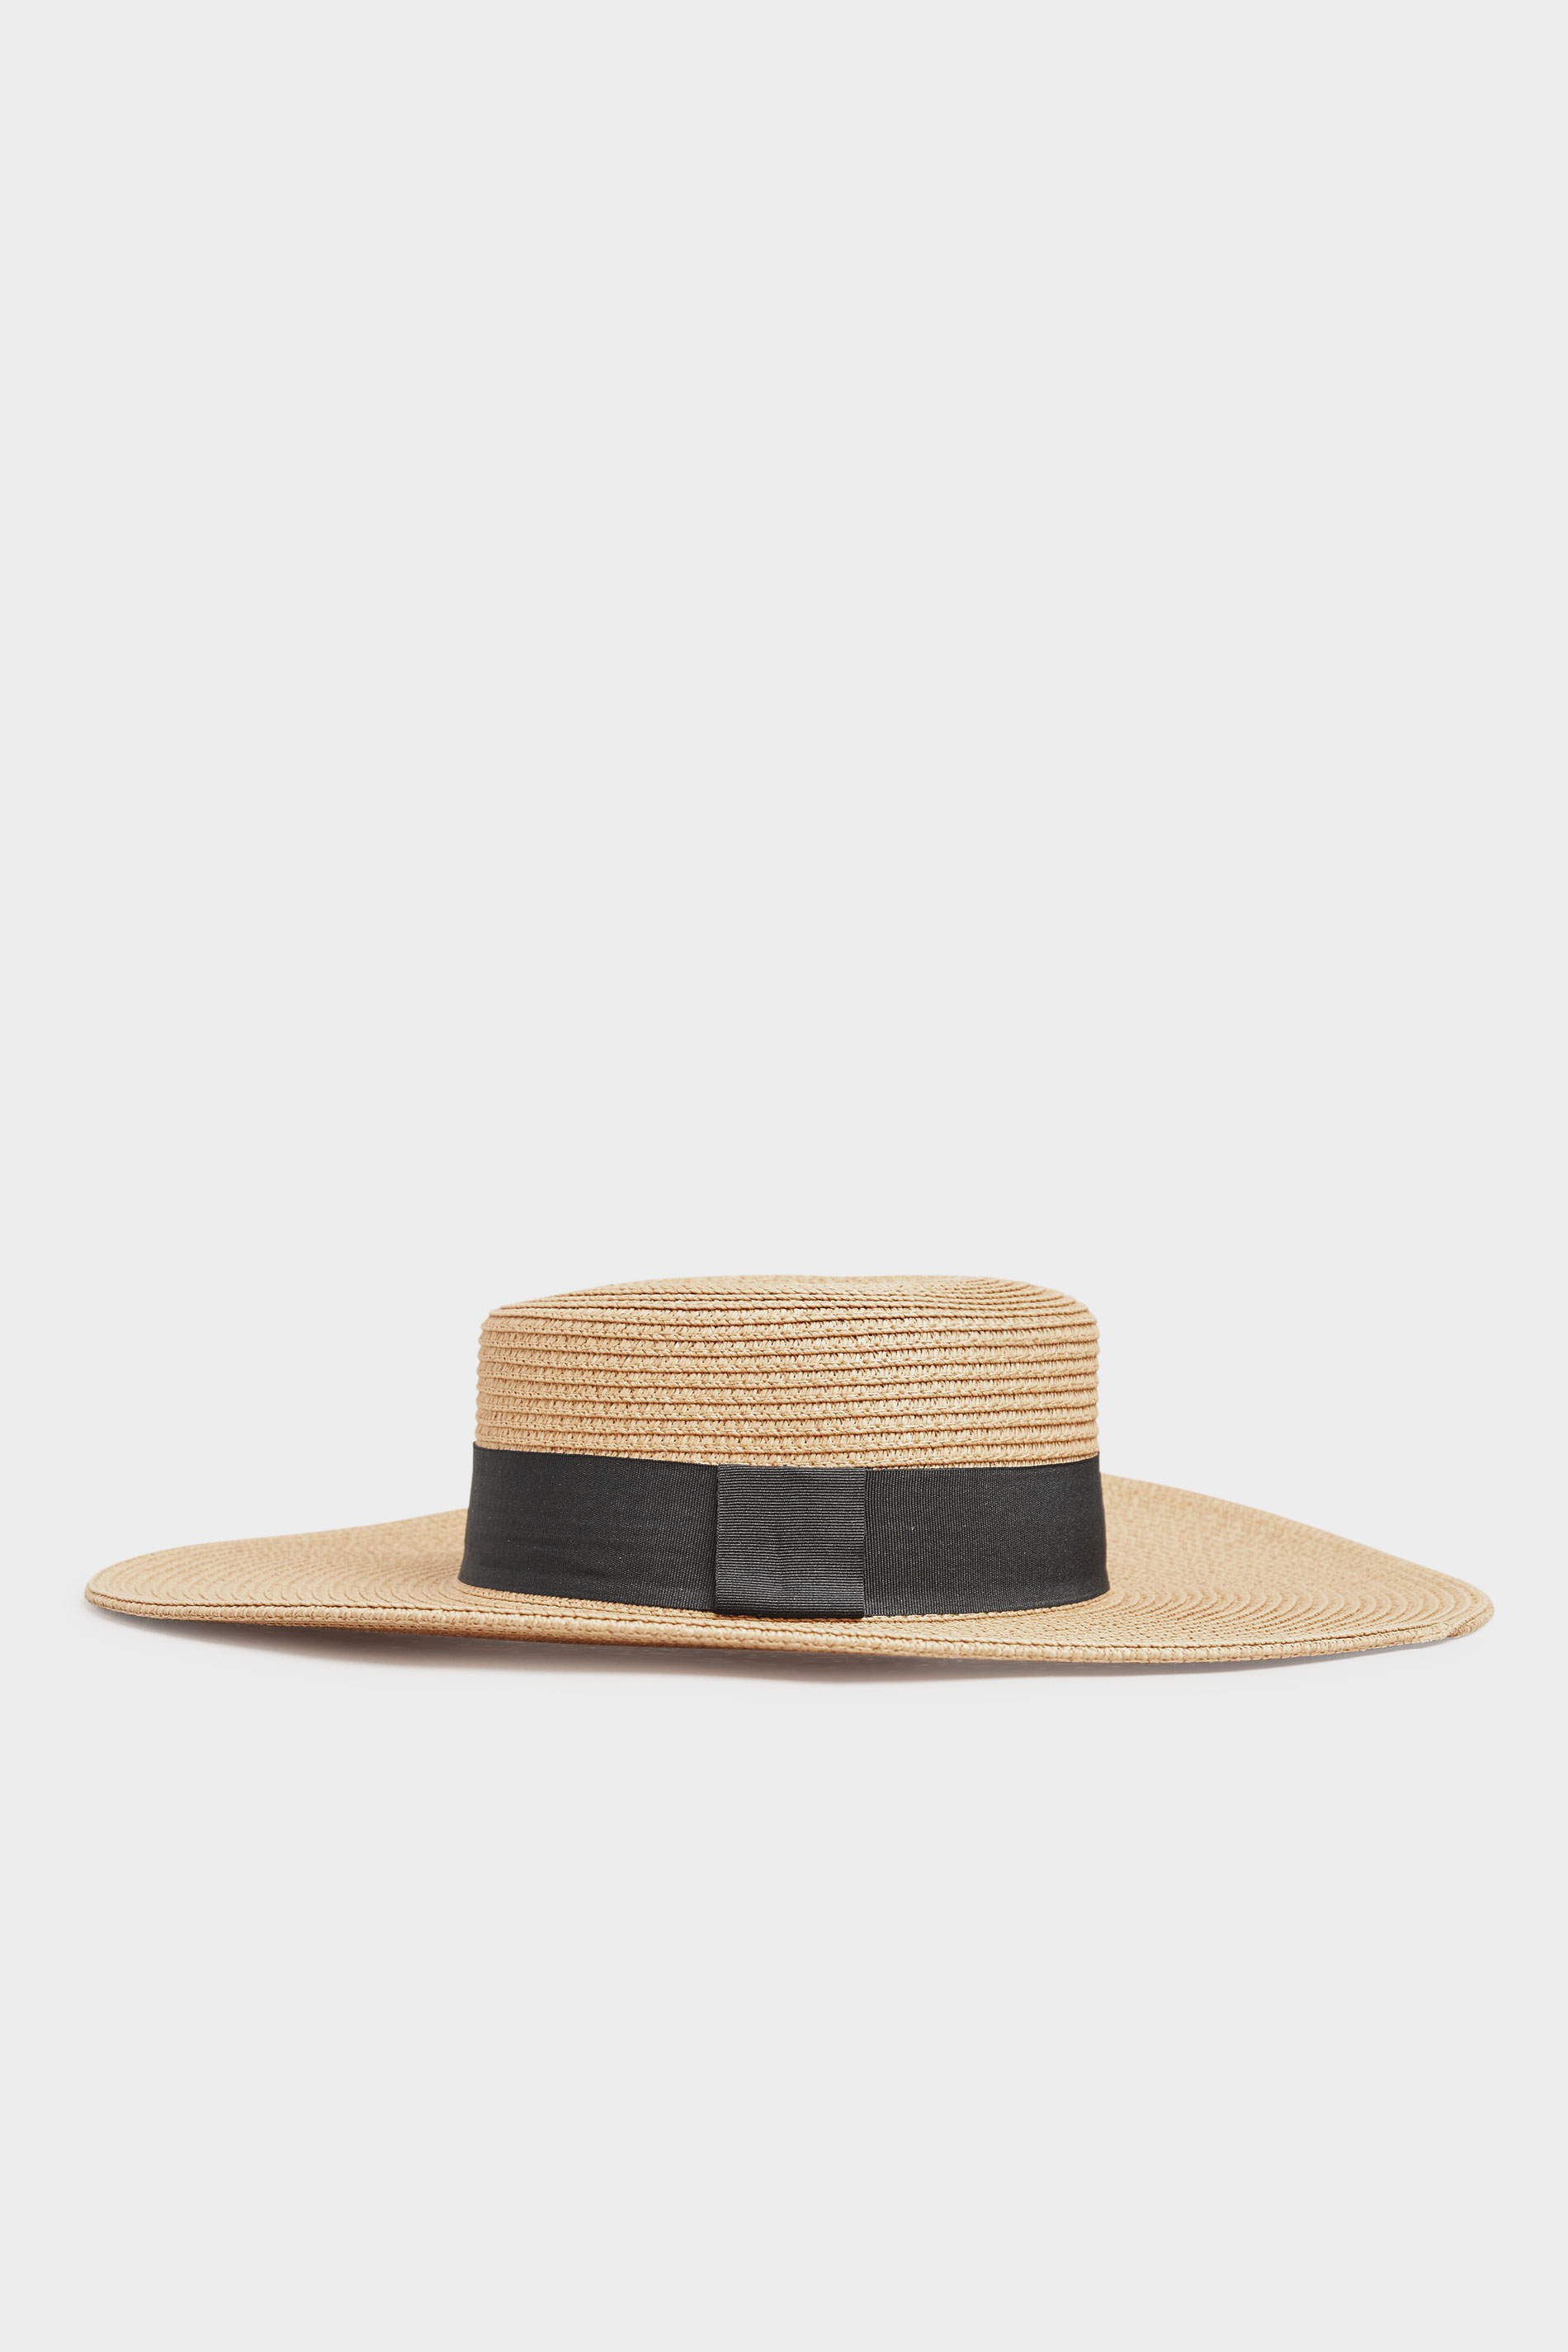 Natural Brown Straw Wide Brim Boater Hat | Yours Clothing 2